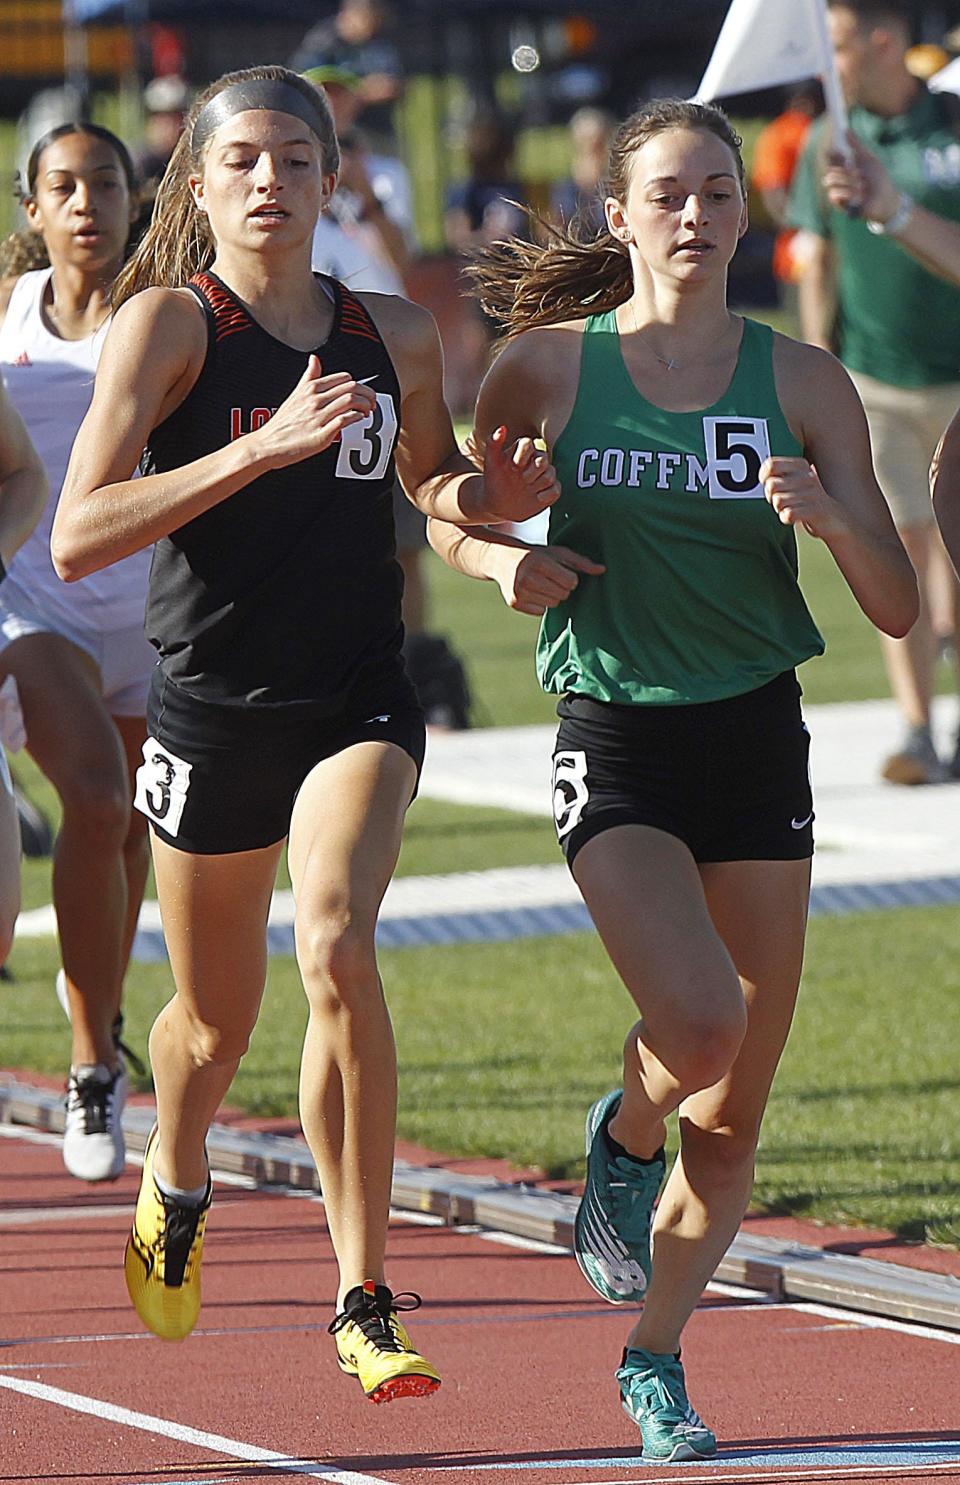 Coffman's Kylie Feeney runs against Loveland's Madison Conatser in the 800 meters at the Division I state meet. Feeney placed fifth.